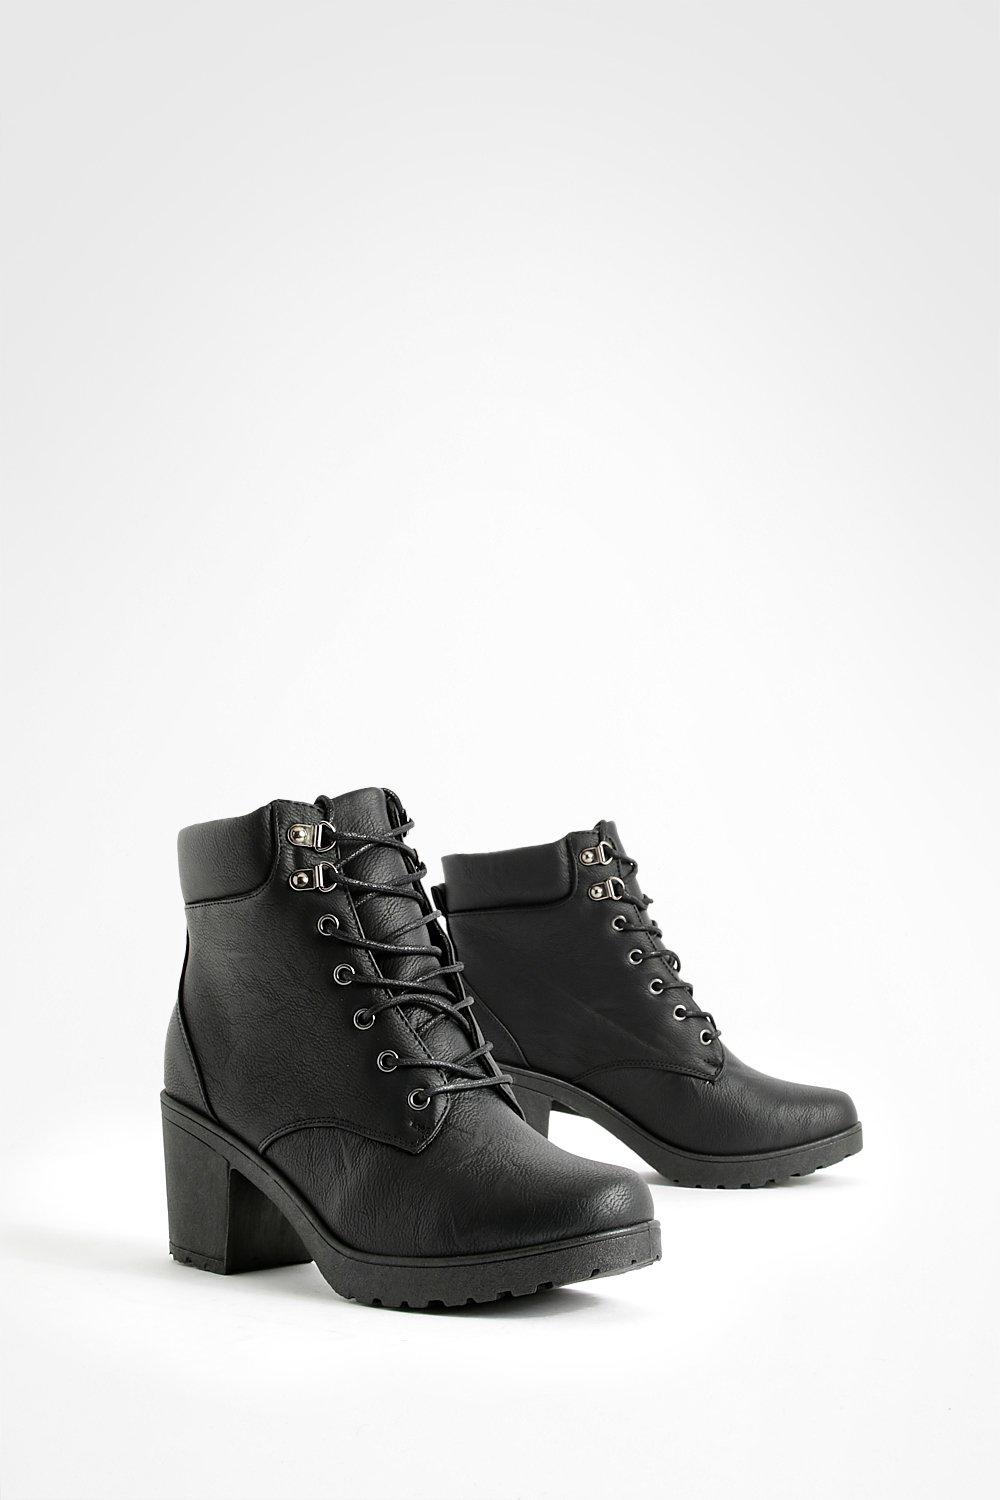 Wide Width Lace Up Heeled Combat Boots 